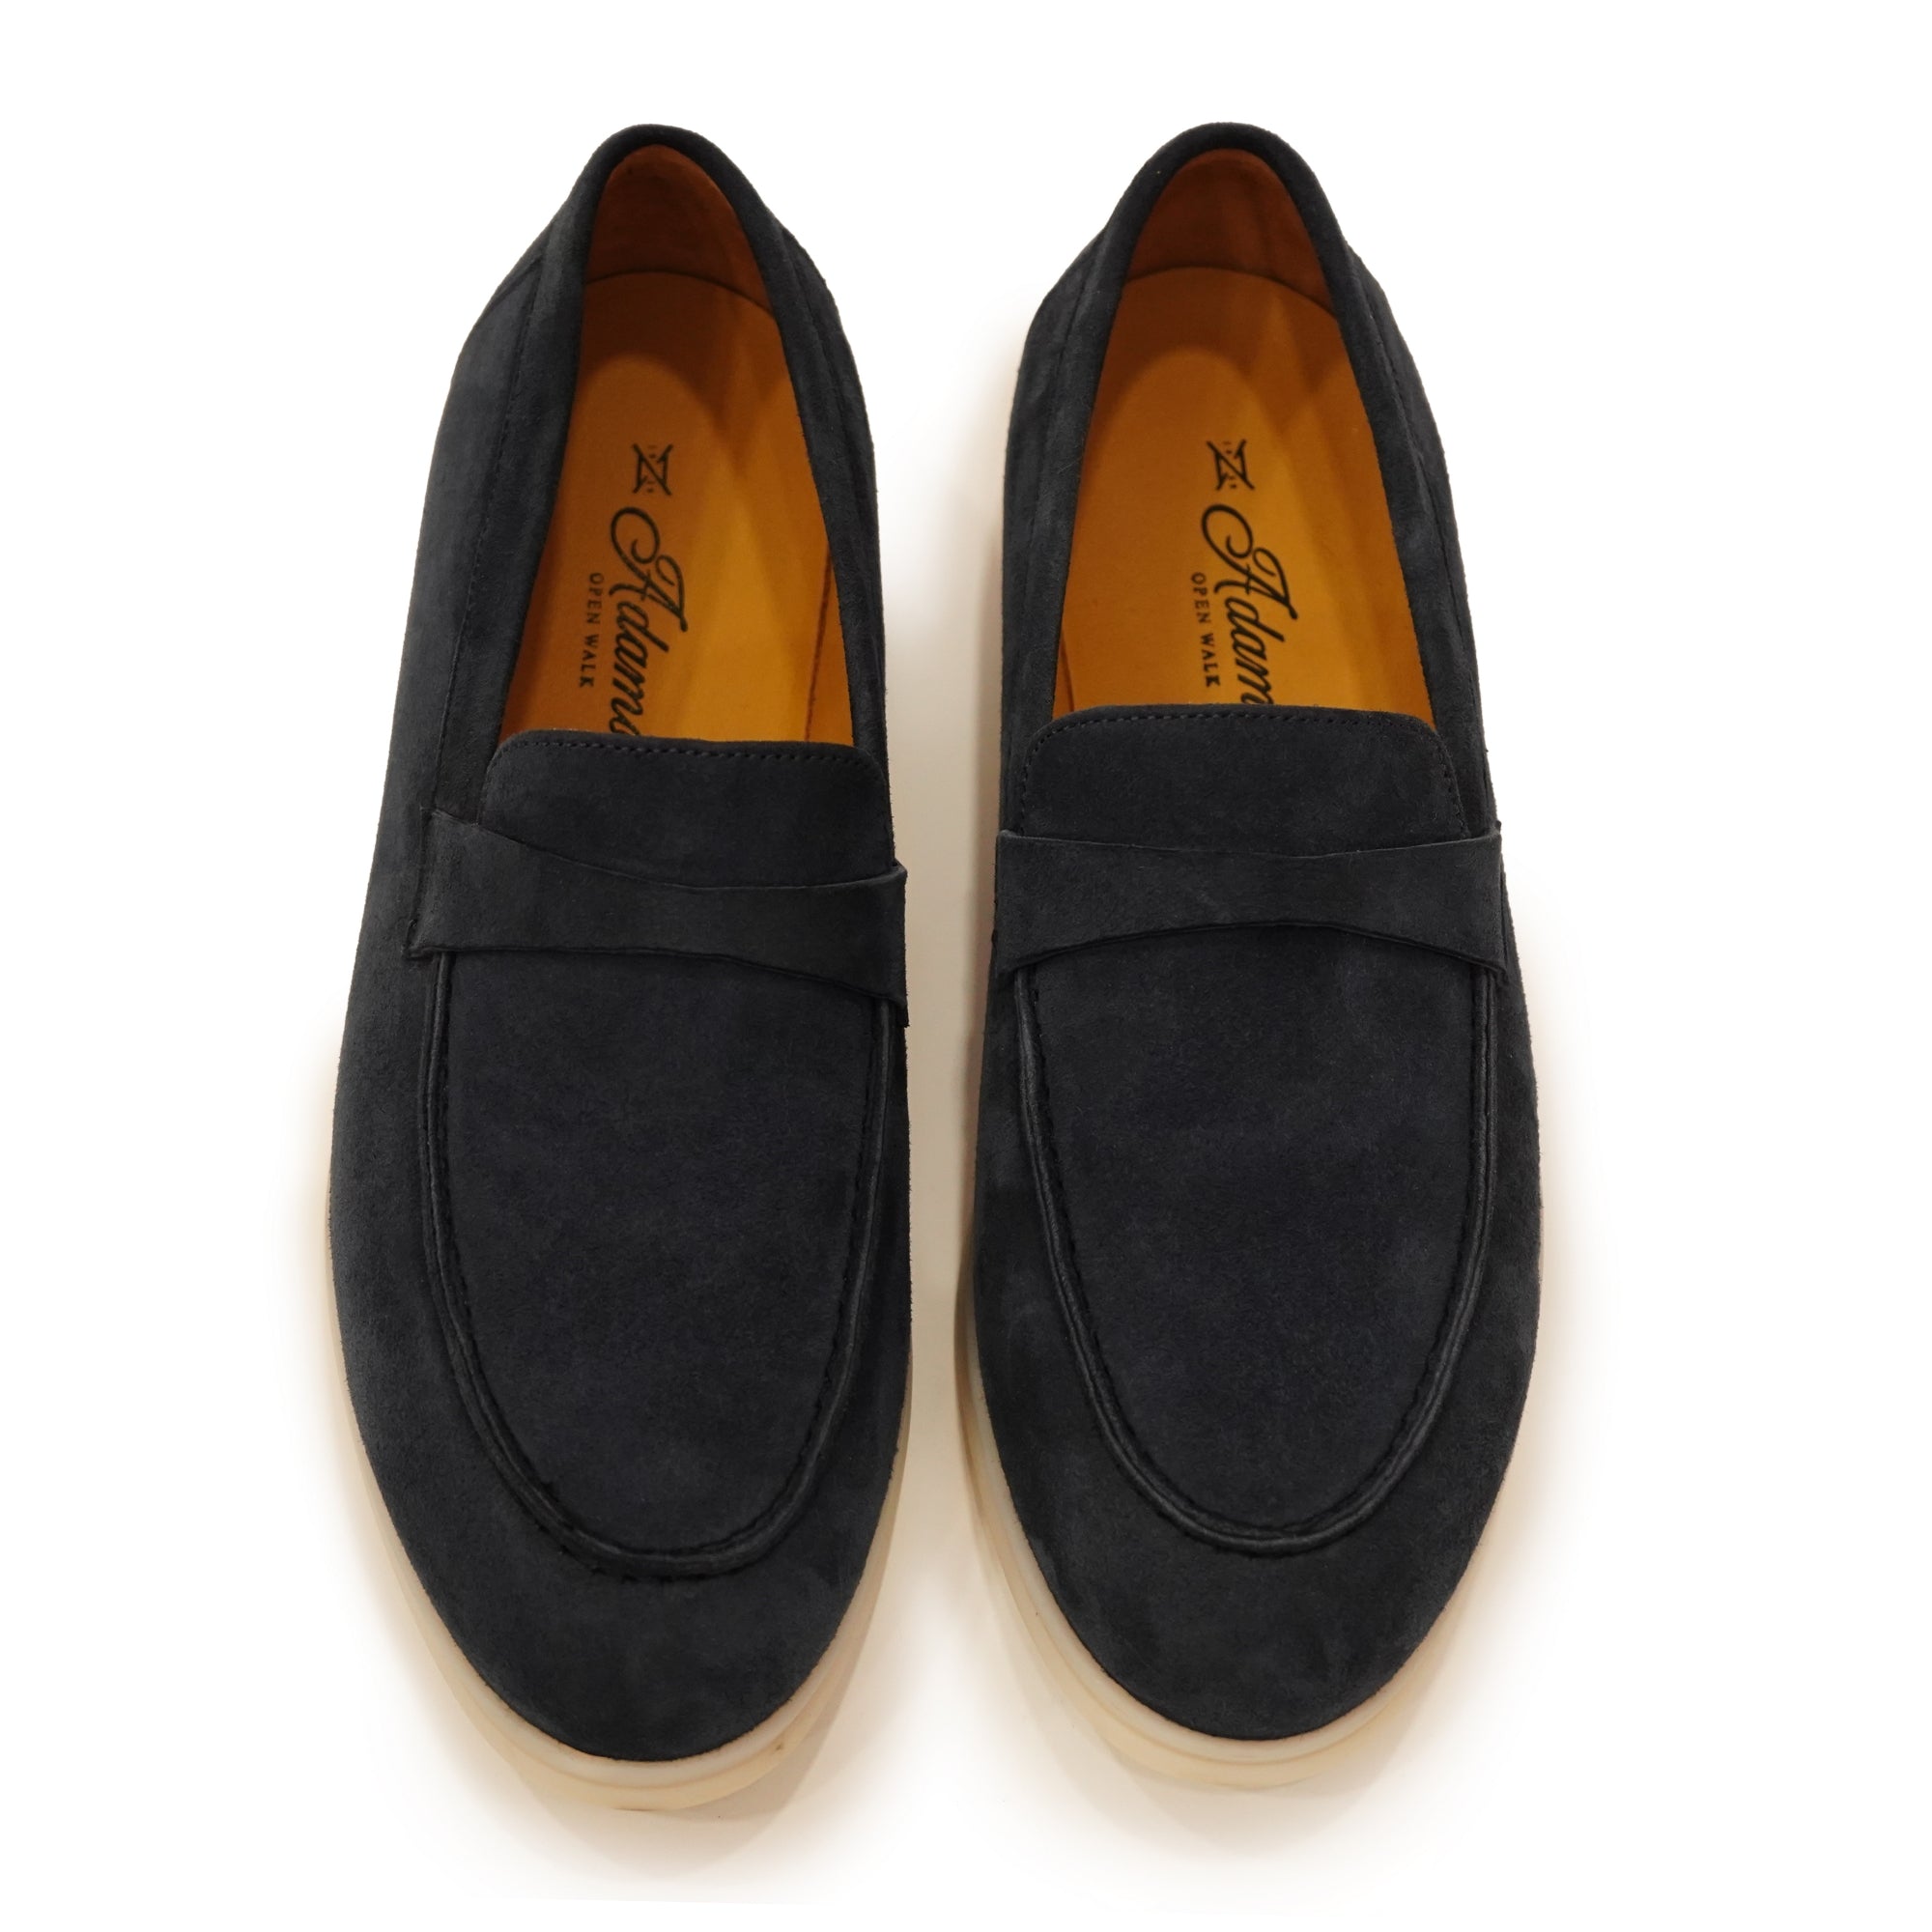 Midnight Glide Suede Loafers